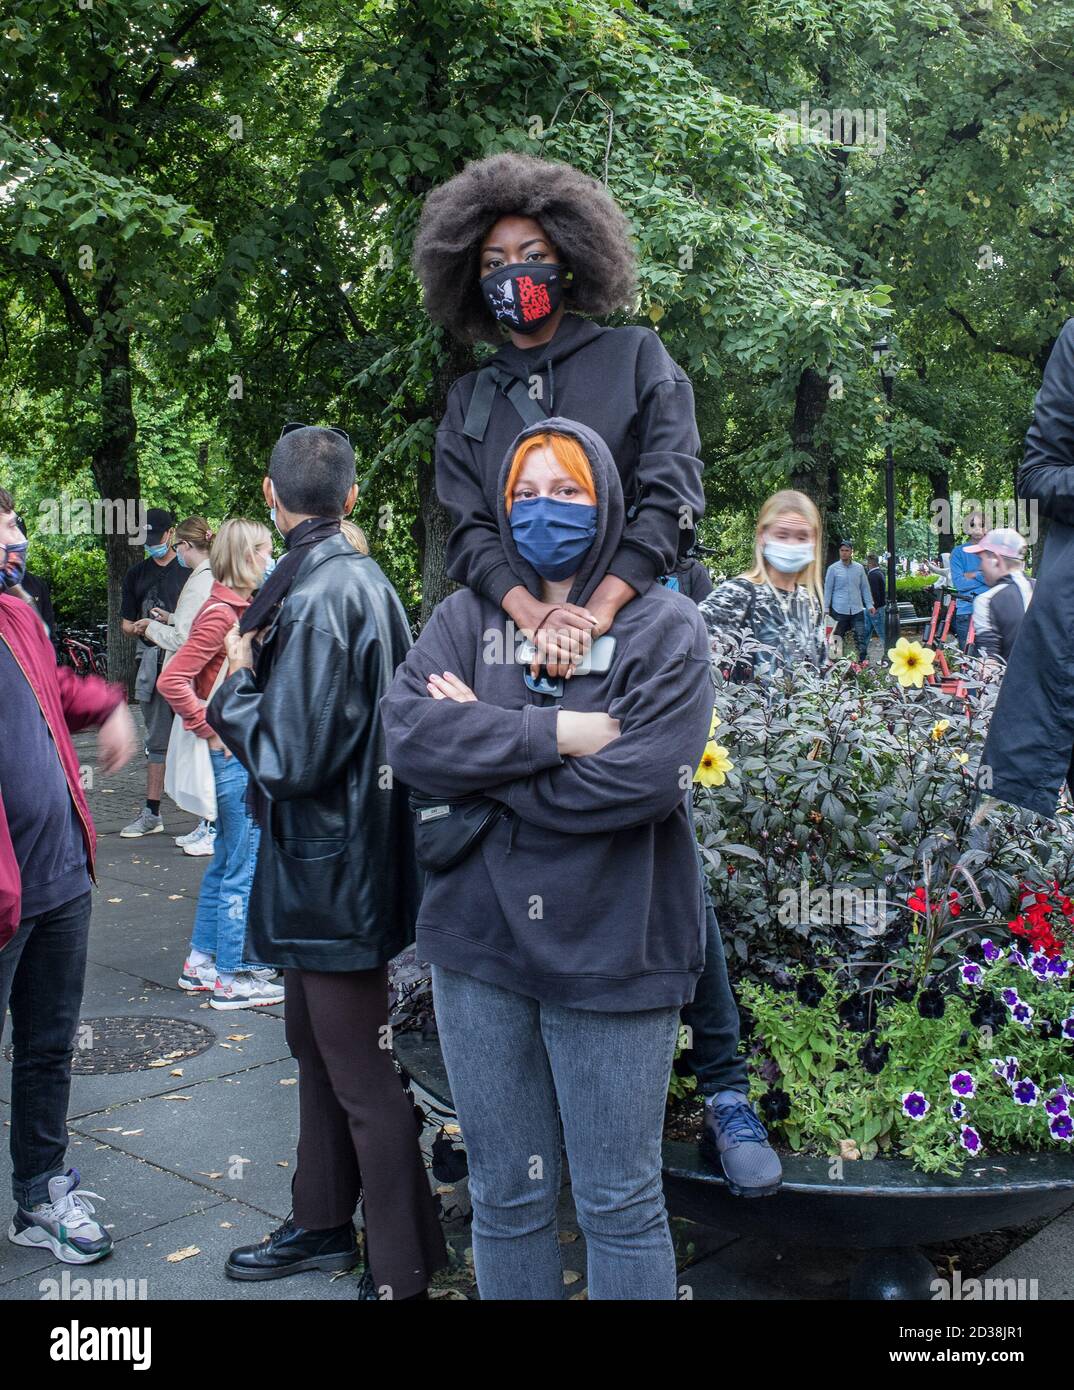 Oslo, Norway. 29th Aug, 2020. Protesters posing for the camera during the  demonstration.Hundreds of Black Lives Matter protesters gathered outside  the Norwegian parliament building in solidarity against the death of George  Floyd